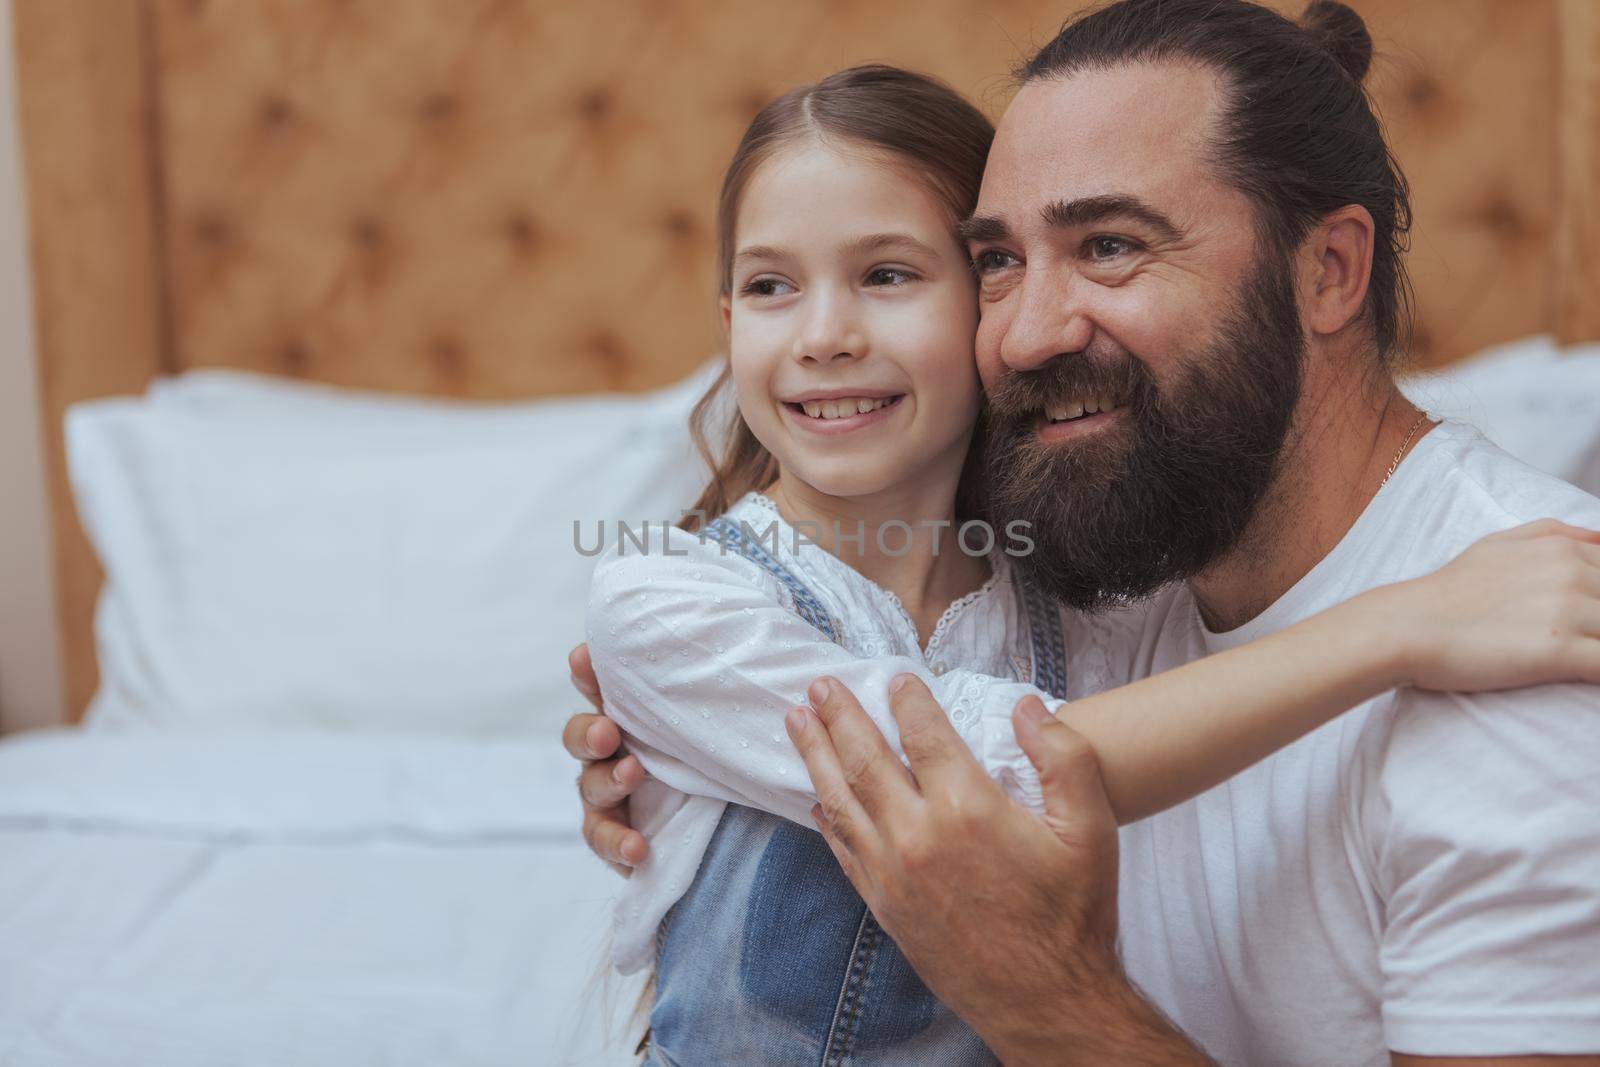 Handsome mature bearded man embracing his little daughter, smiling looking away joyfully. Happy little girl hugging her dad at home, copy space